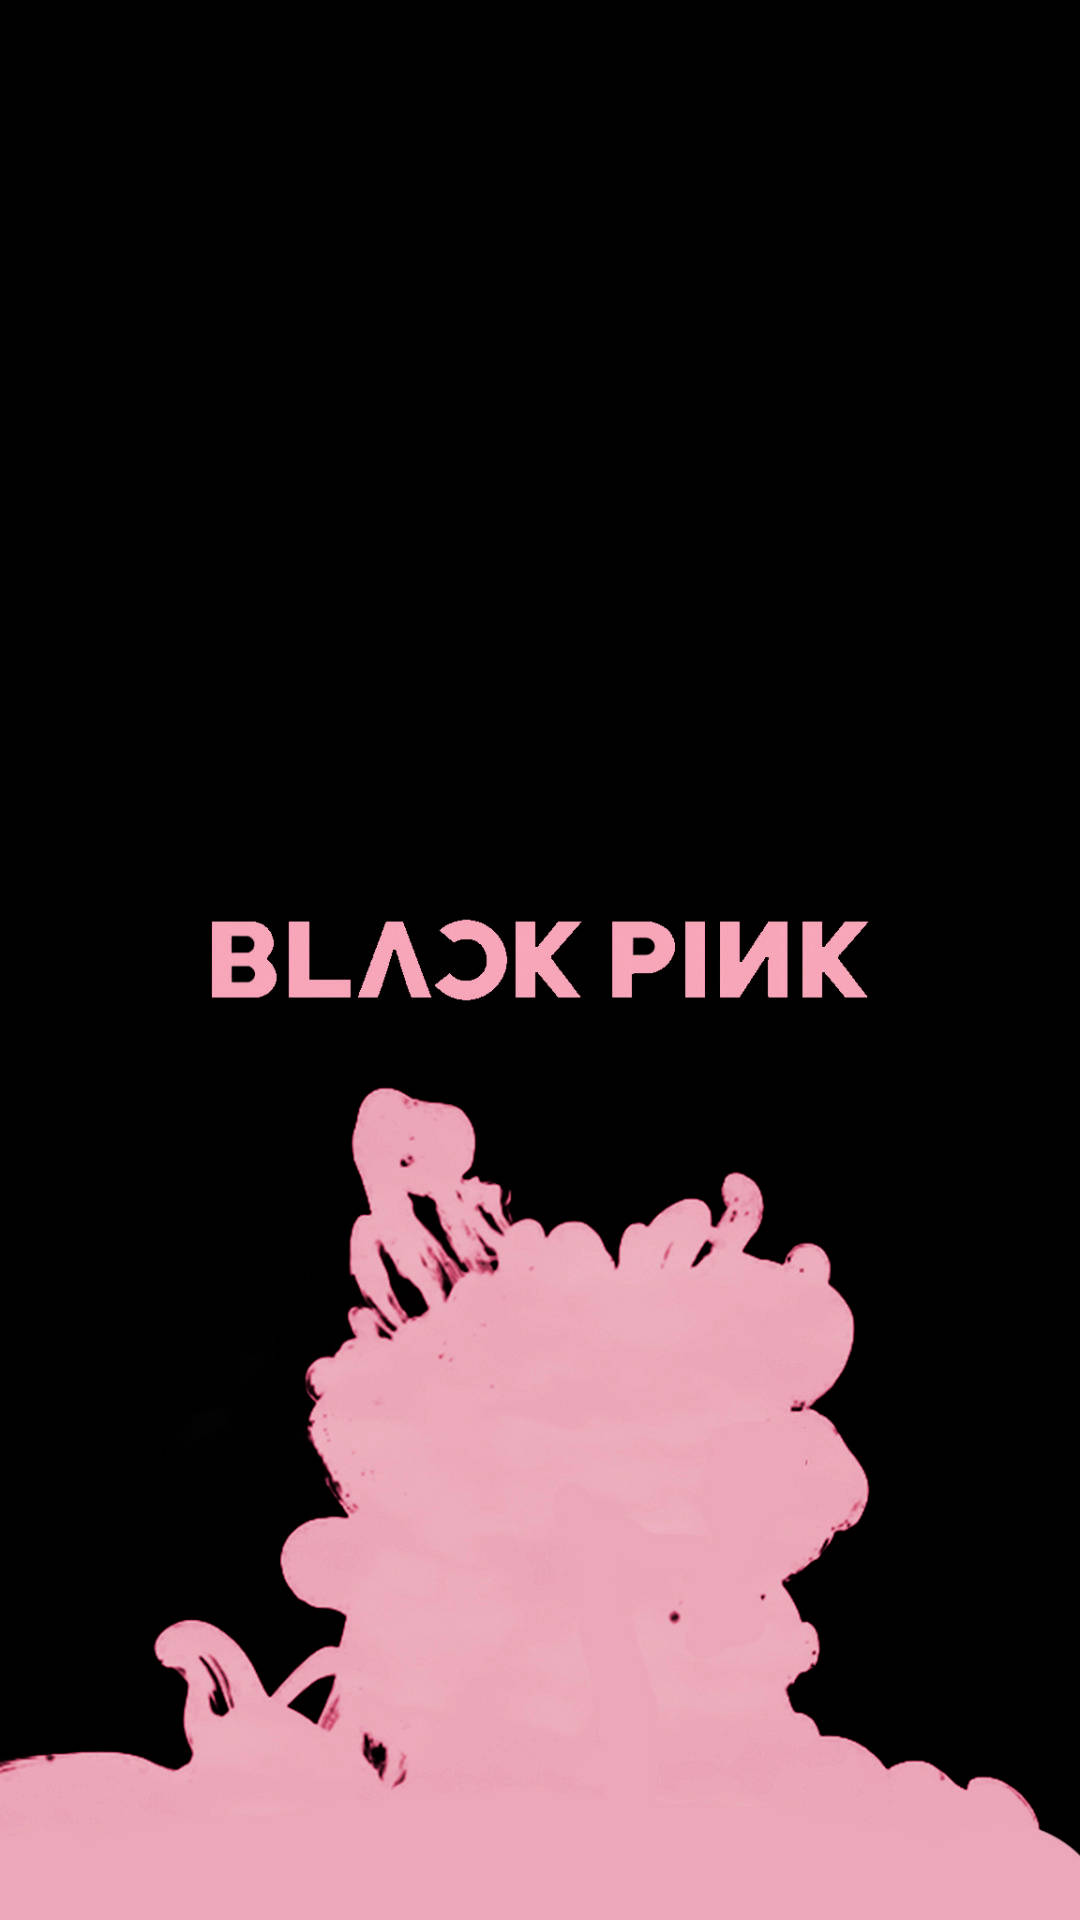 1080X1920 Blackpink Wallpaper and Background